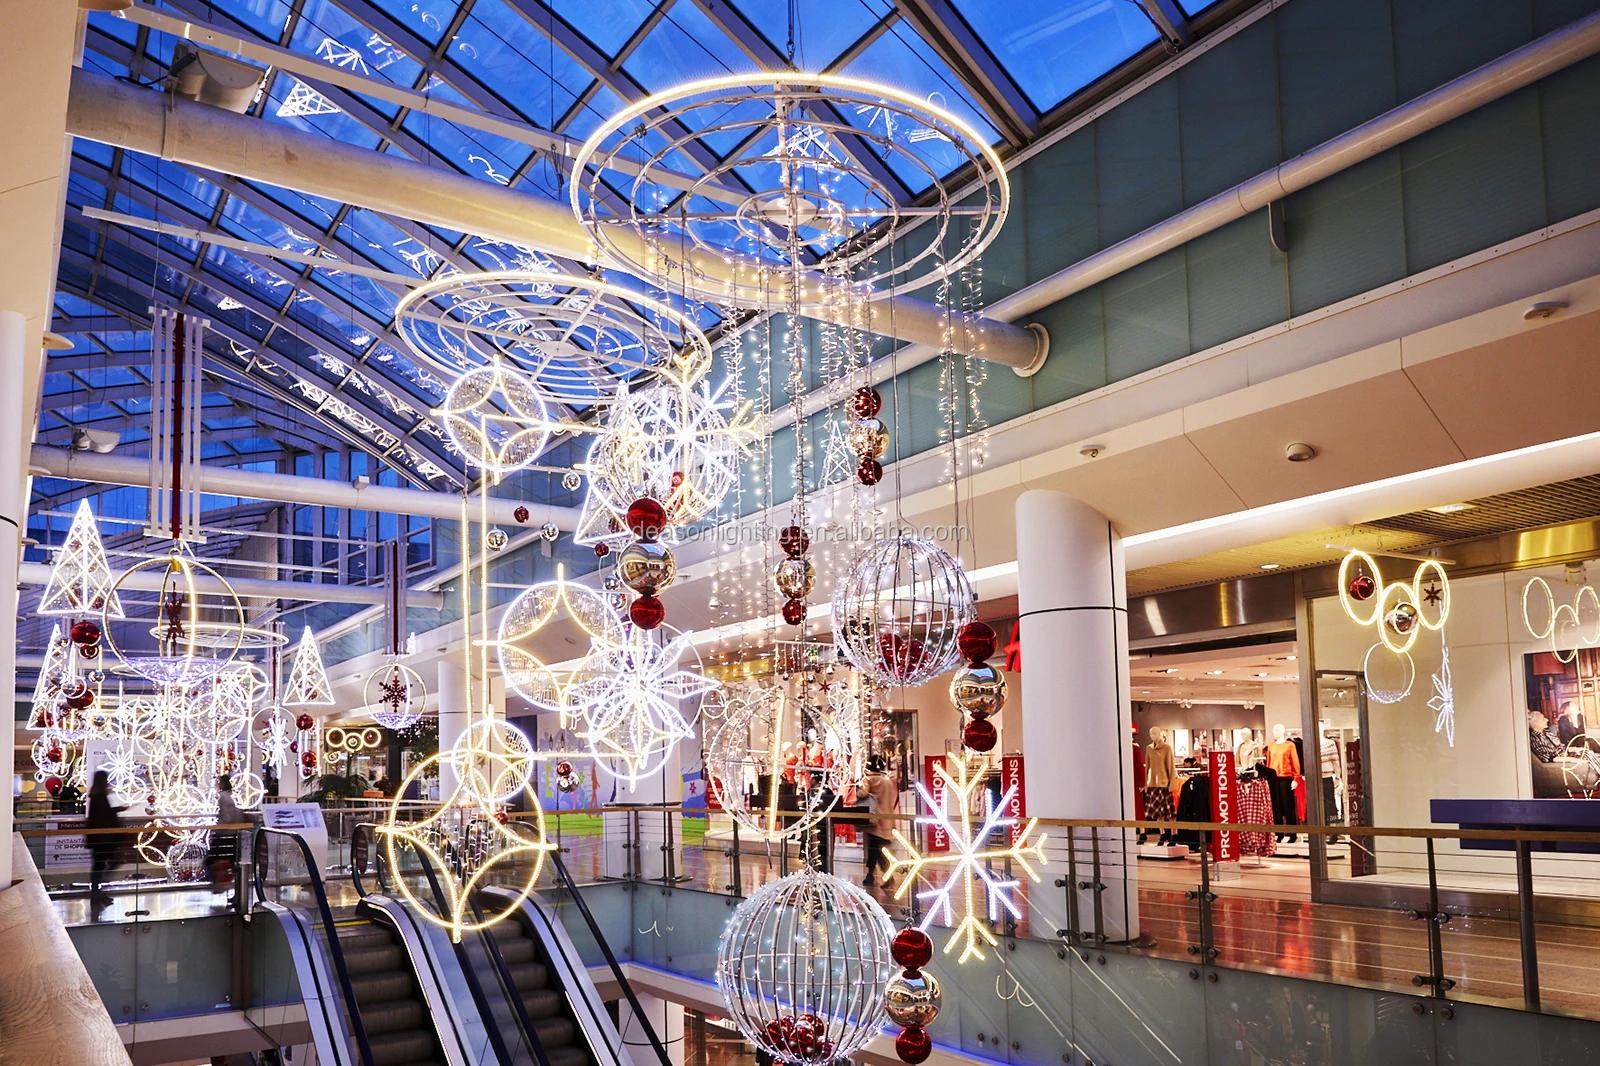 Must See Christmas Mall Decorations in KL! | BusinessToday